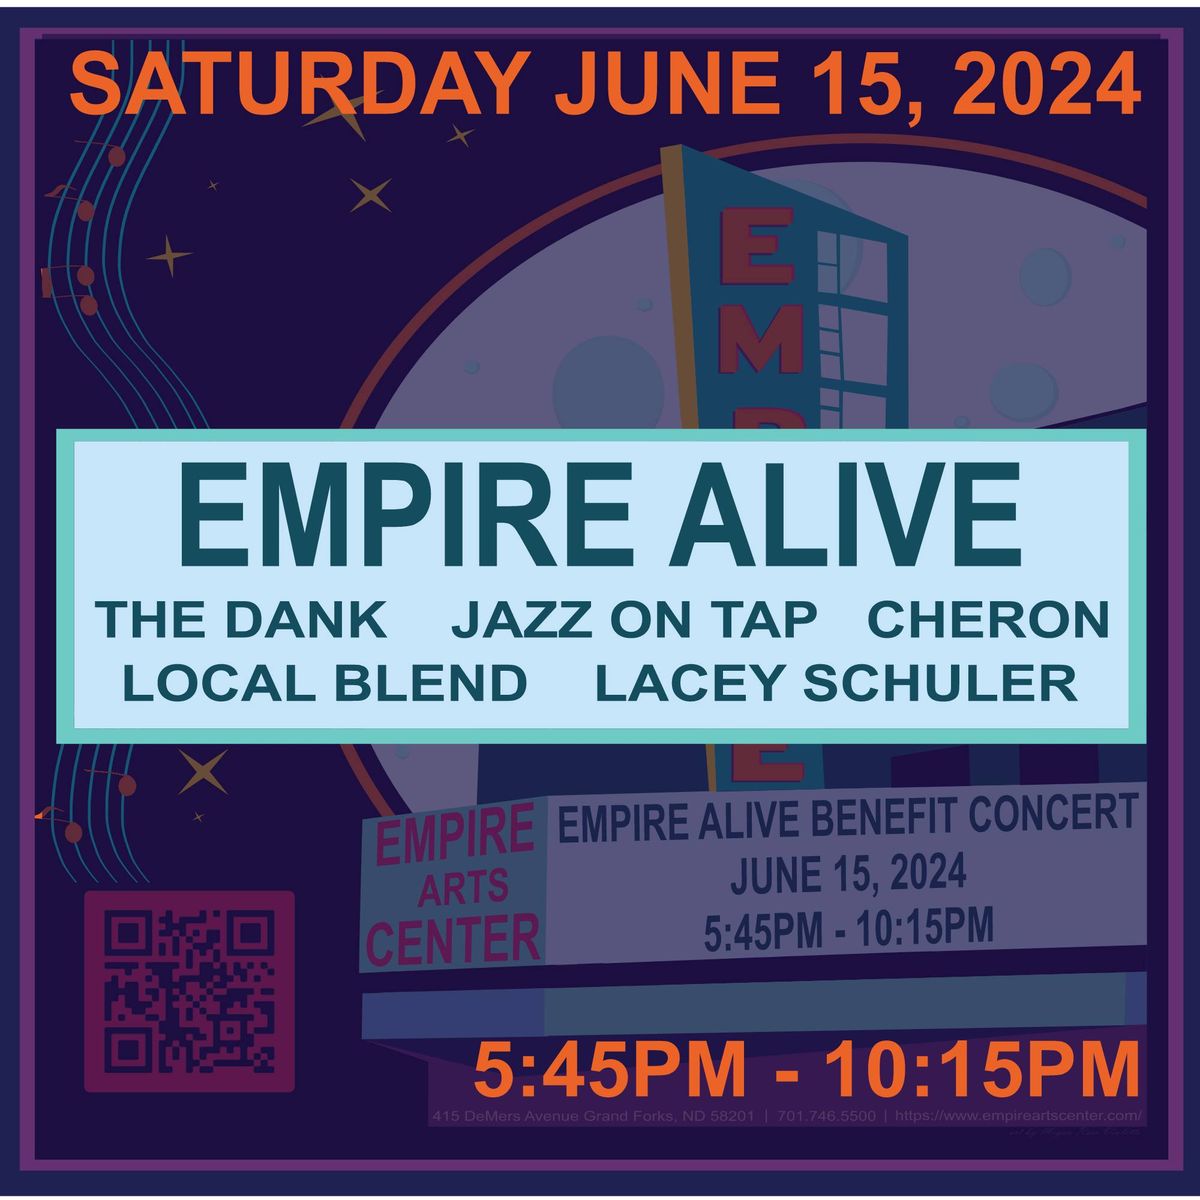 Empire Alive ft. The Dank, Jazz on Tap, Cheron, Local Blend & Lacey Schuler!